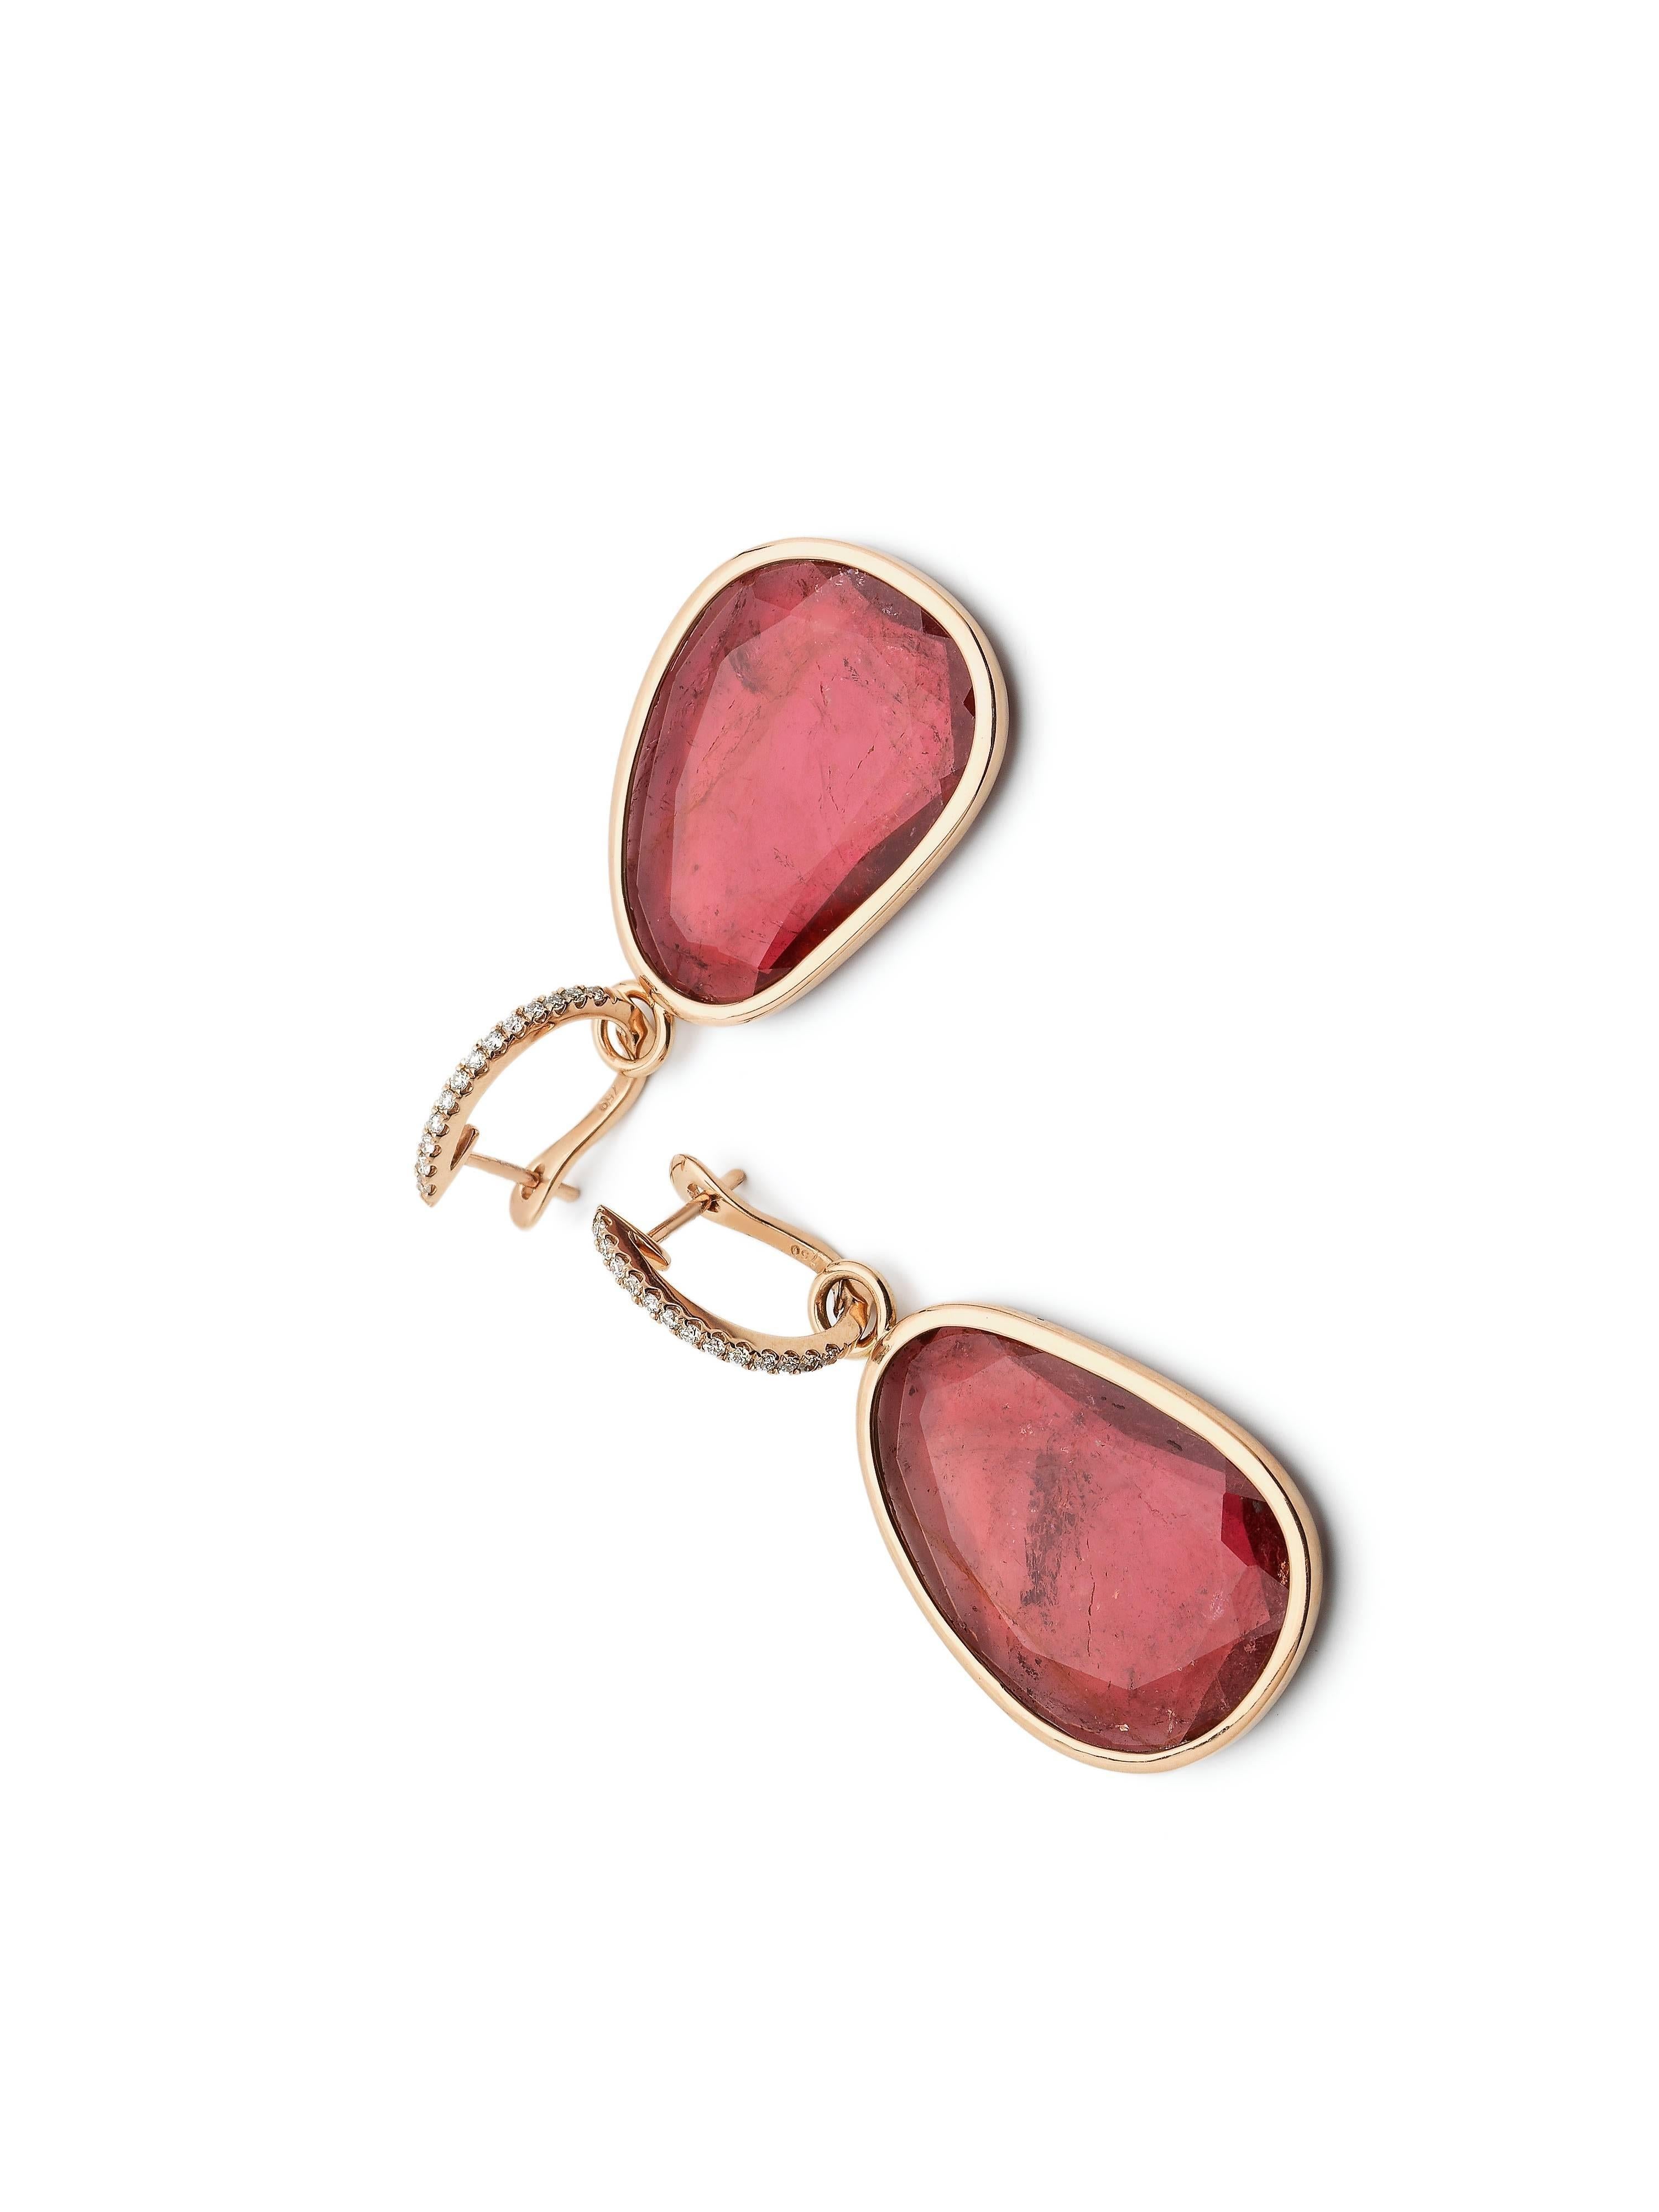 Deep pink flat tourmalines set in 18K rose gold and attached to a latch back which is set with diamonds. The weight of the tourmaline is 29.64ct and the total weight of the diamonds is 0.156ct. The size of the stone including the rim is 19.5mm x